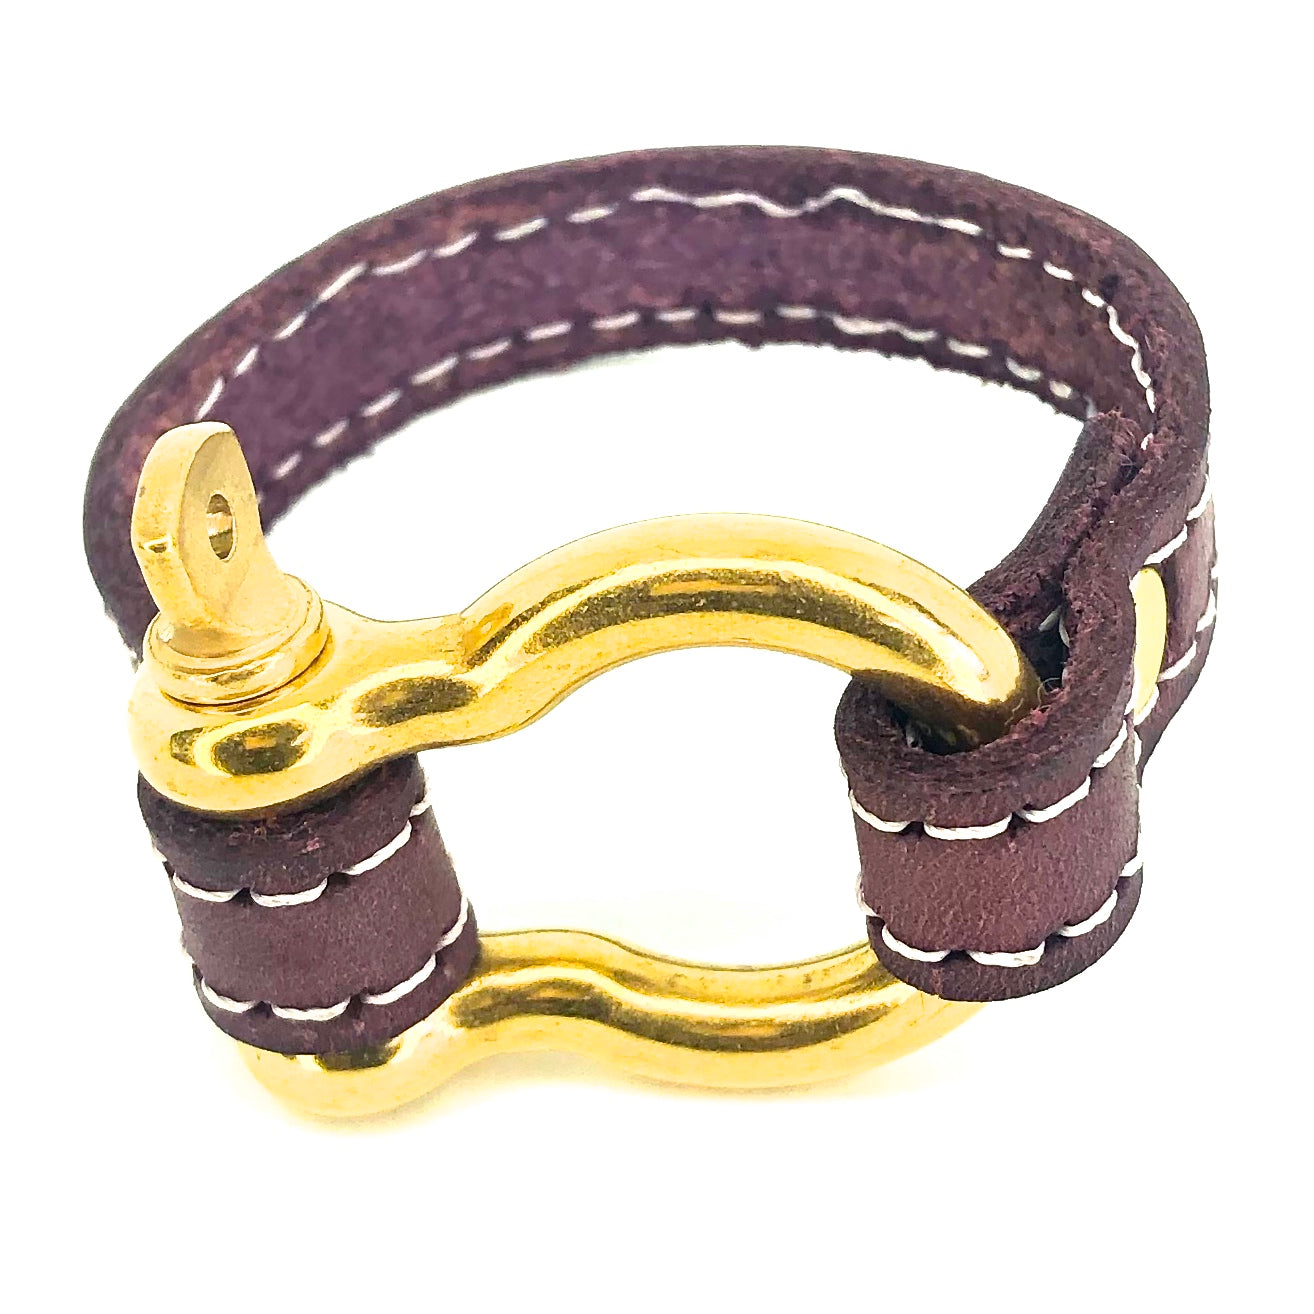 Nyet jewelry Signature Gold Bracelet Purple by nyet jewelry